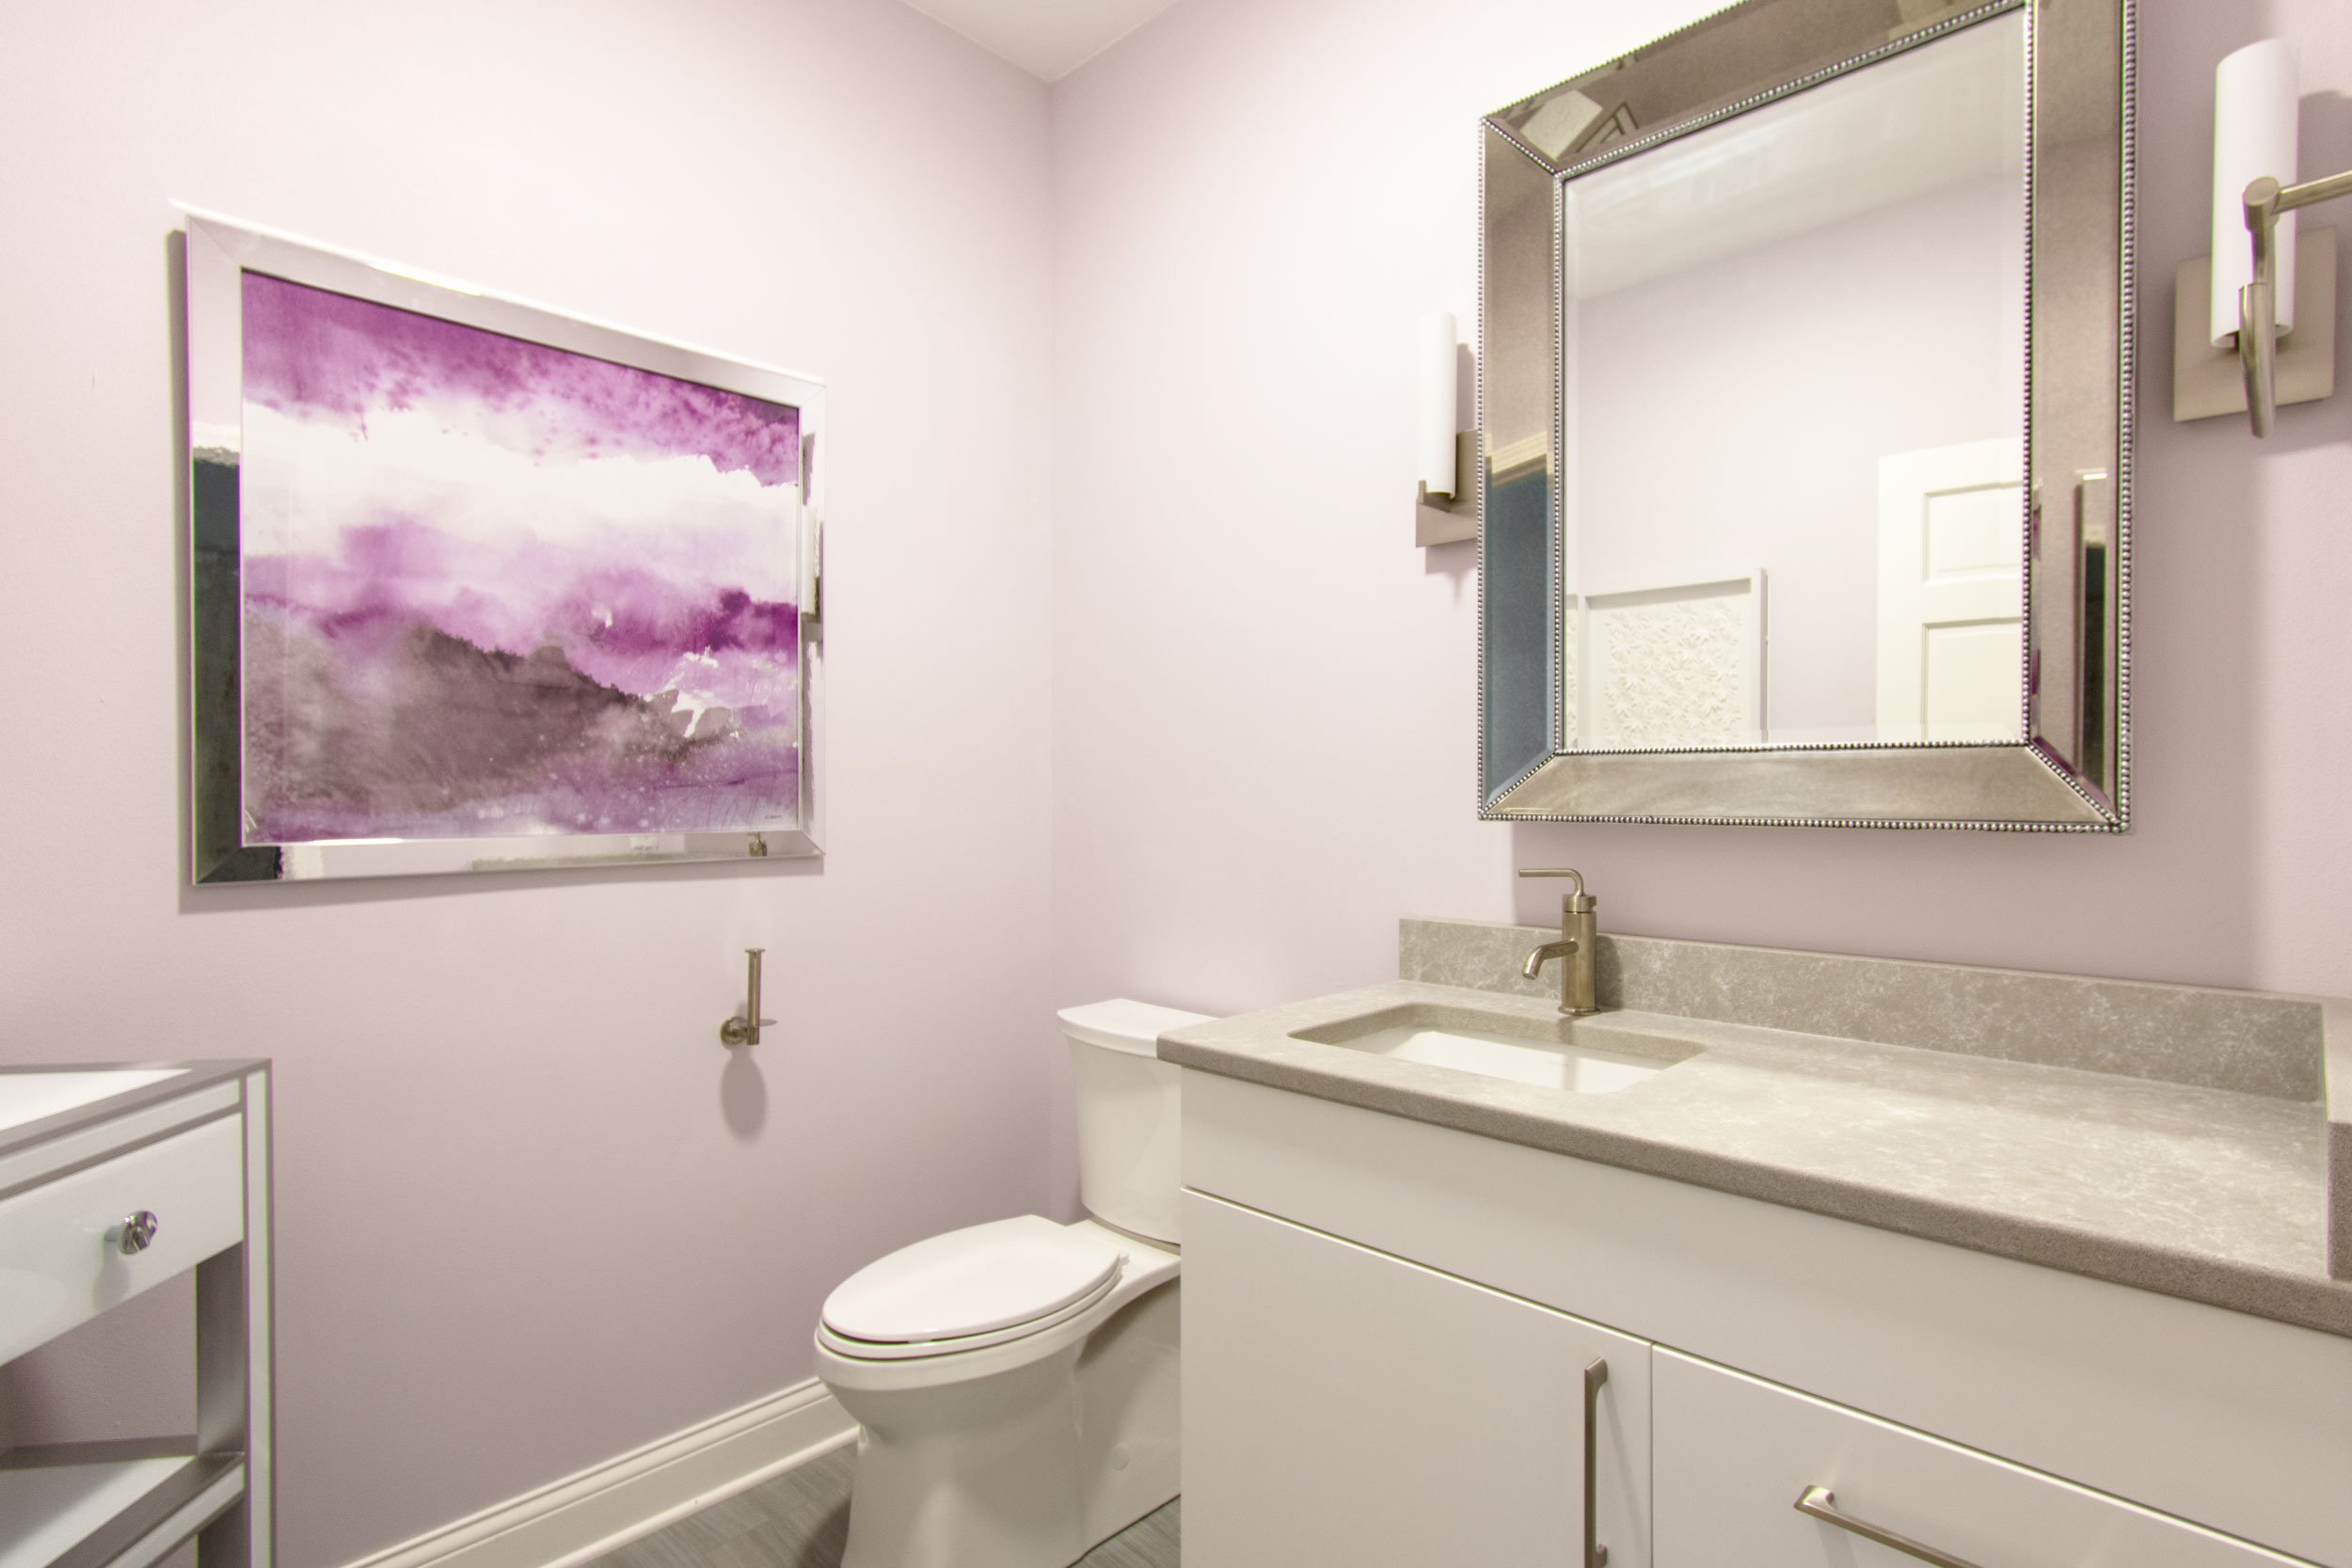 Powder bathroom with purple walls, white vanity and gray counter